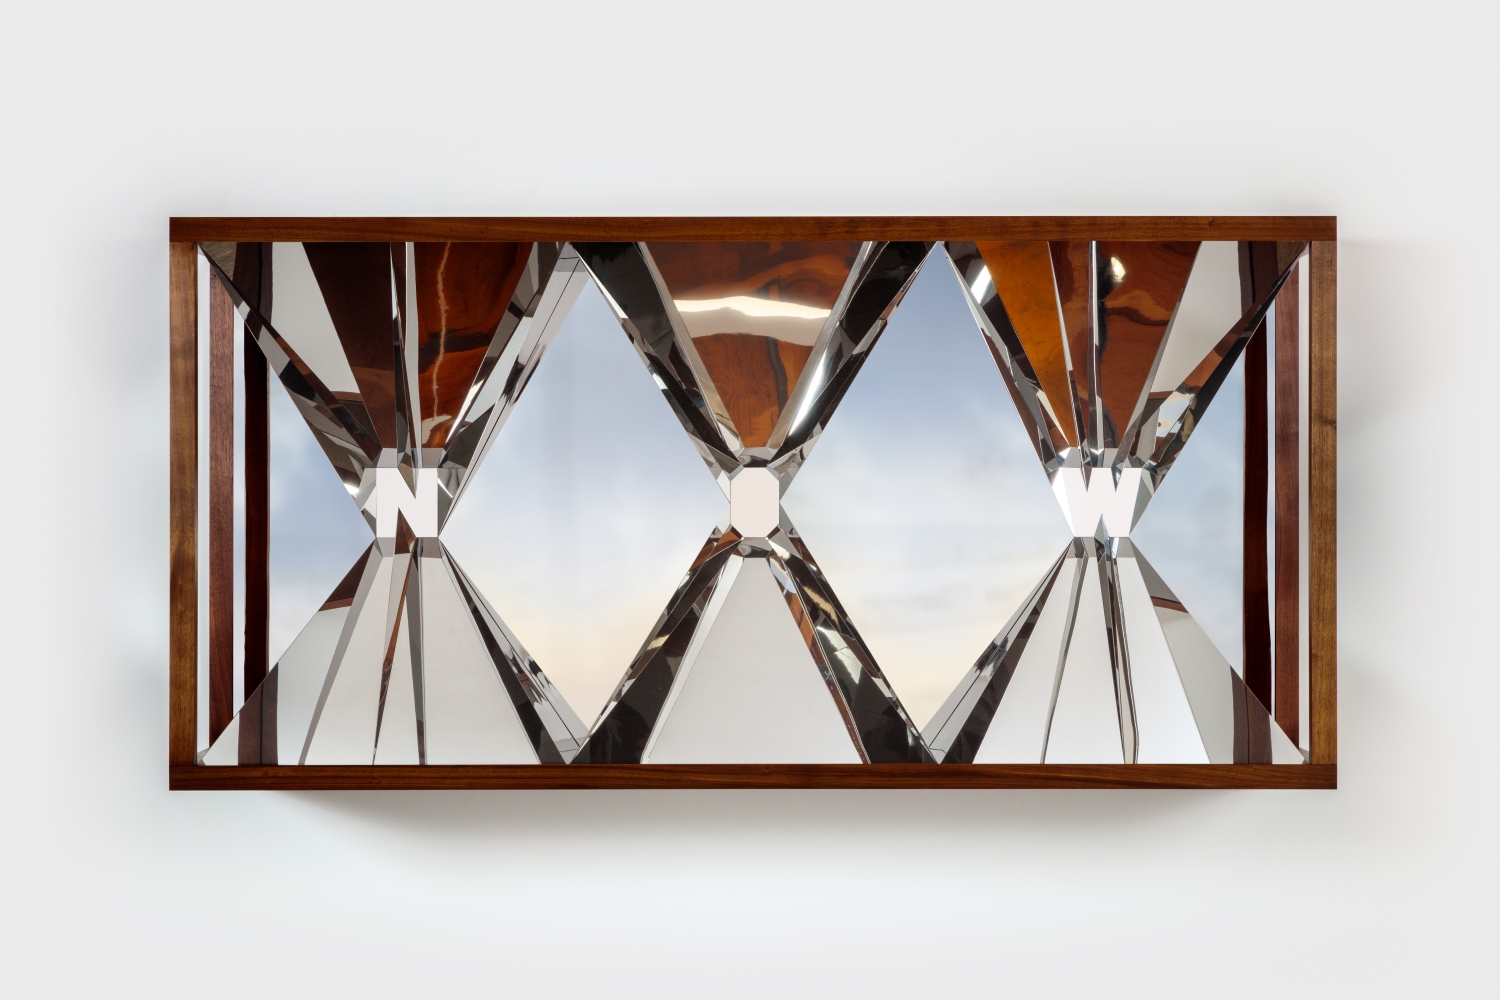 Doug Aitken

NOW (dark wood)

2016

Wood, polished stainless steel, aluminum

44 7/8 x 91 1/4 x 26 3/8 inches (114 x 231.8 x 67 cm)

Variation&amp;nbsp;of 4, with 2 AP

DA 554

&amp;nbsp;

INQUIRE